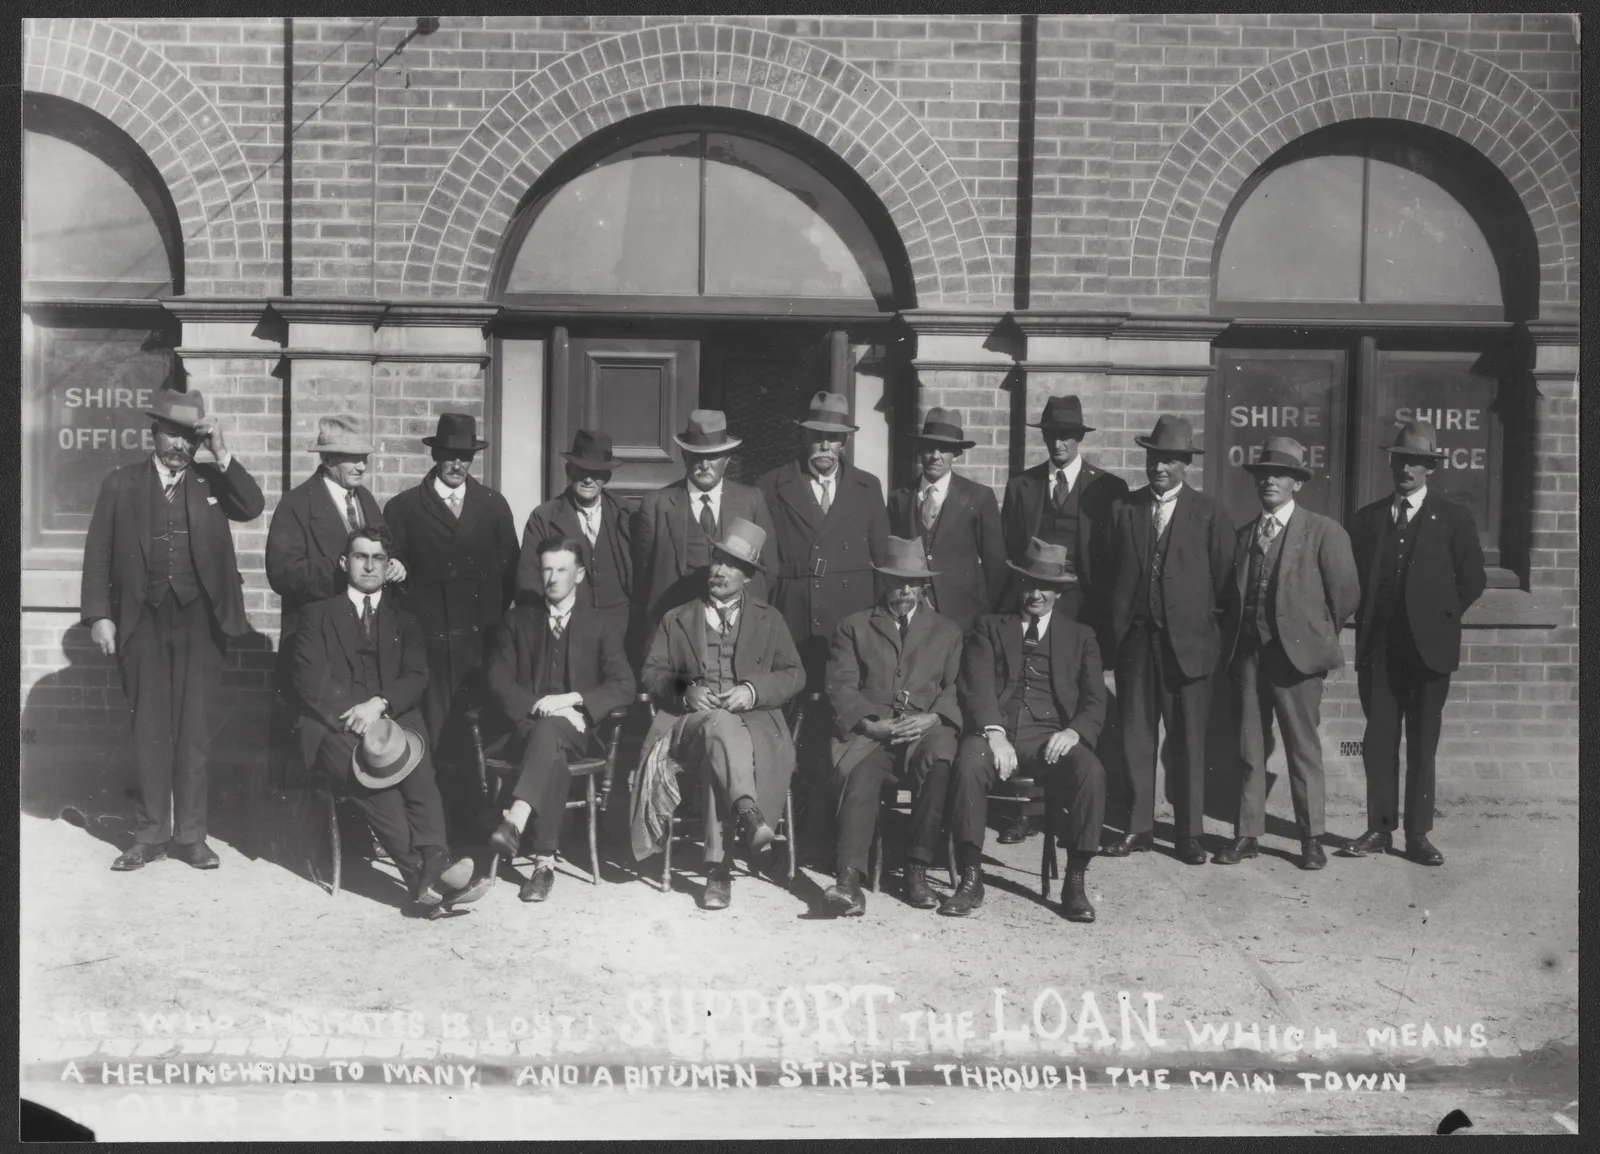 Group portrait showing men in front of a brick shire office.